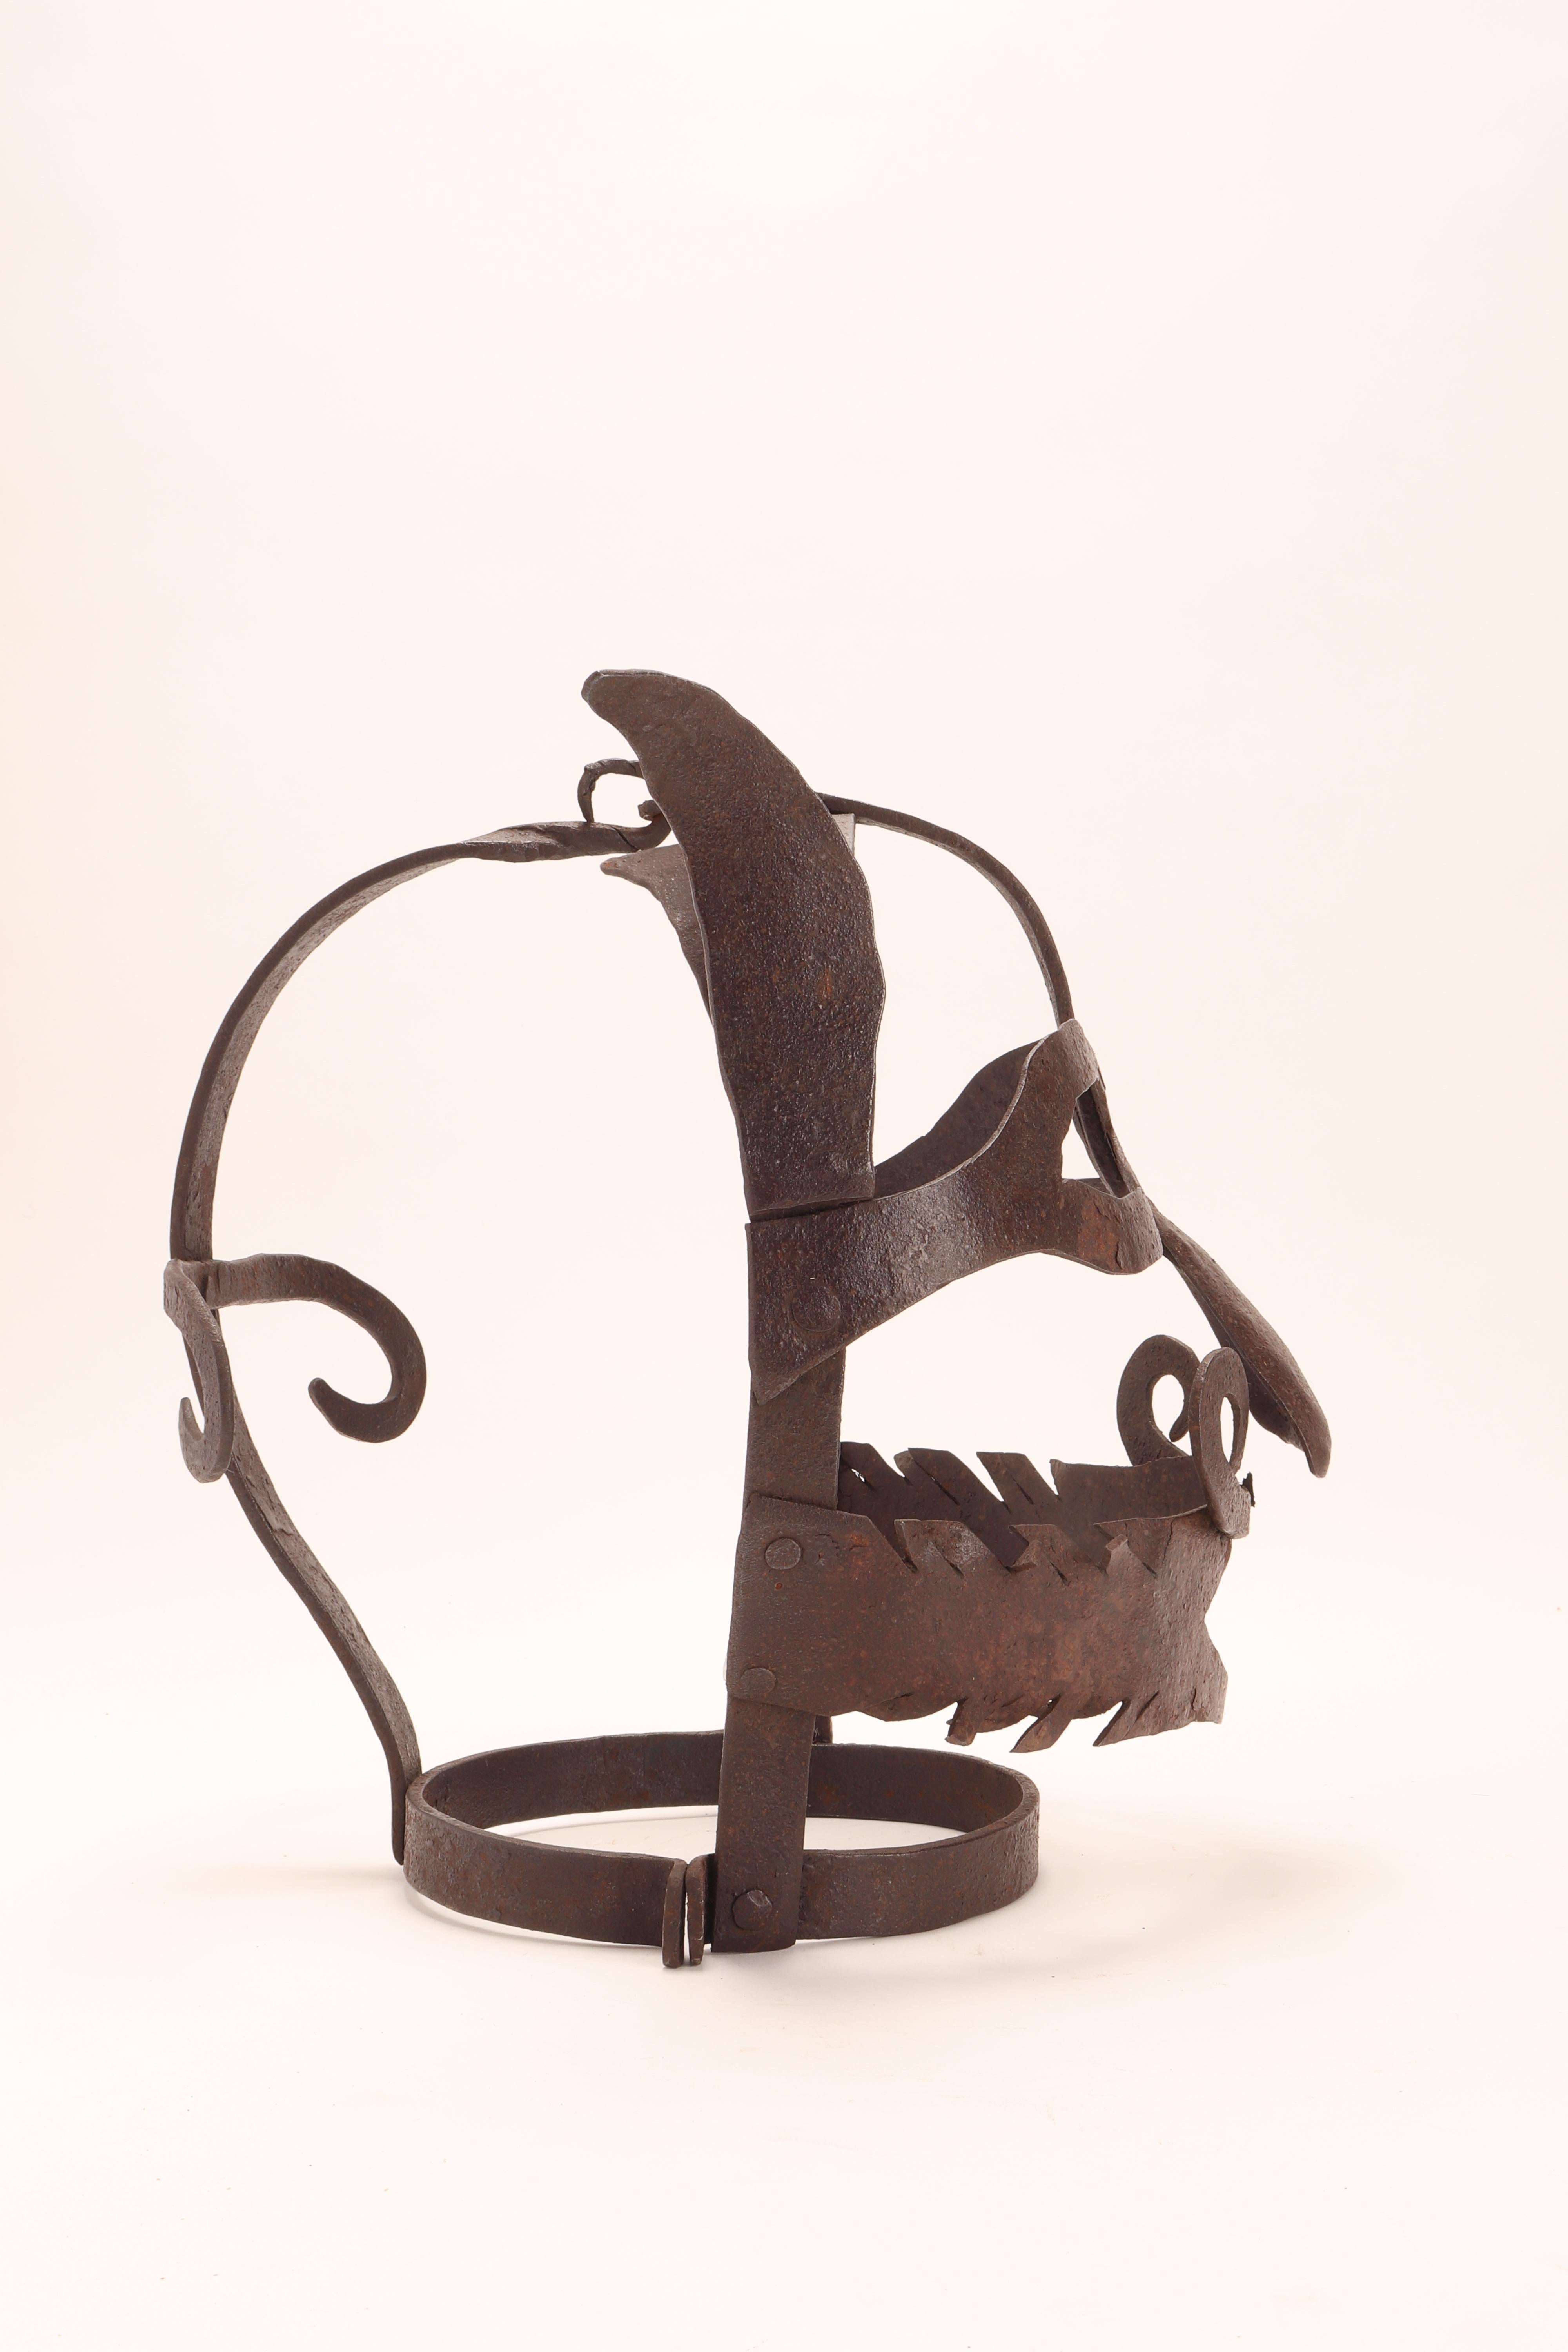 Scold’s bridle, a metal mask, was used to punish mainly women found gossiping, nagging, brawling with neighbors or lying. The torture device is an iron muzzle in an iron framework that enclosed the head. United Kingdom, early 1700.